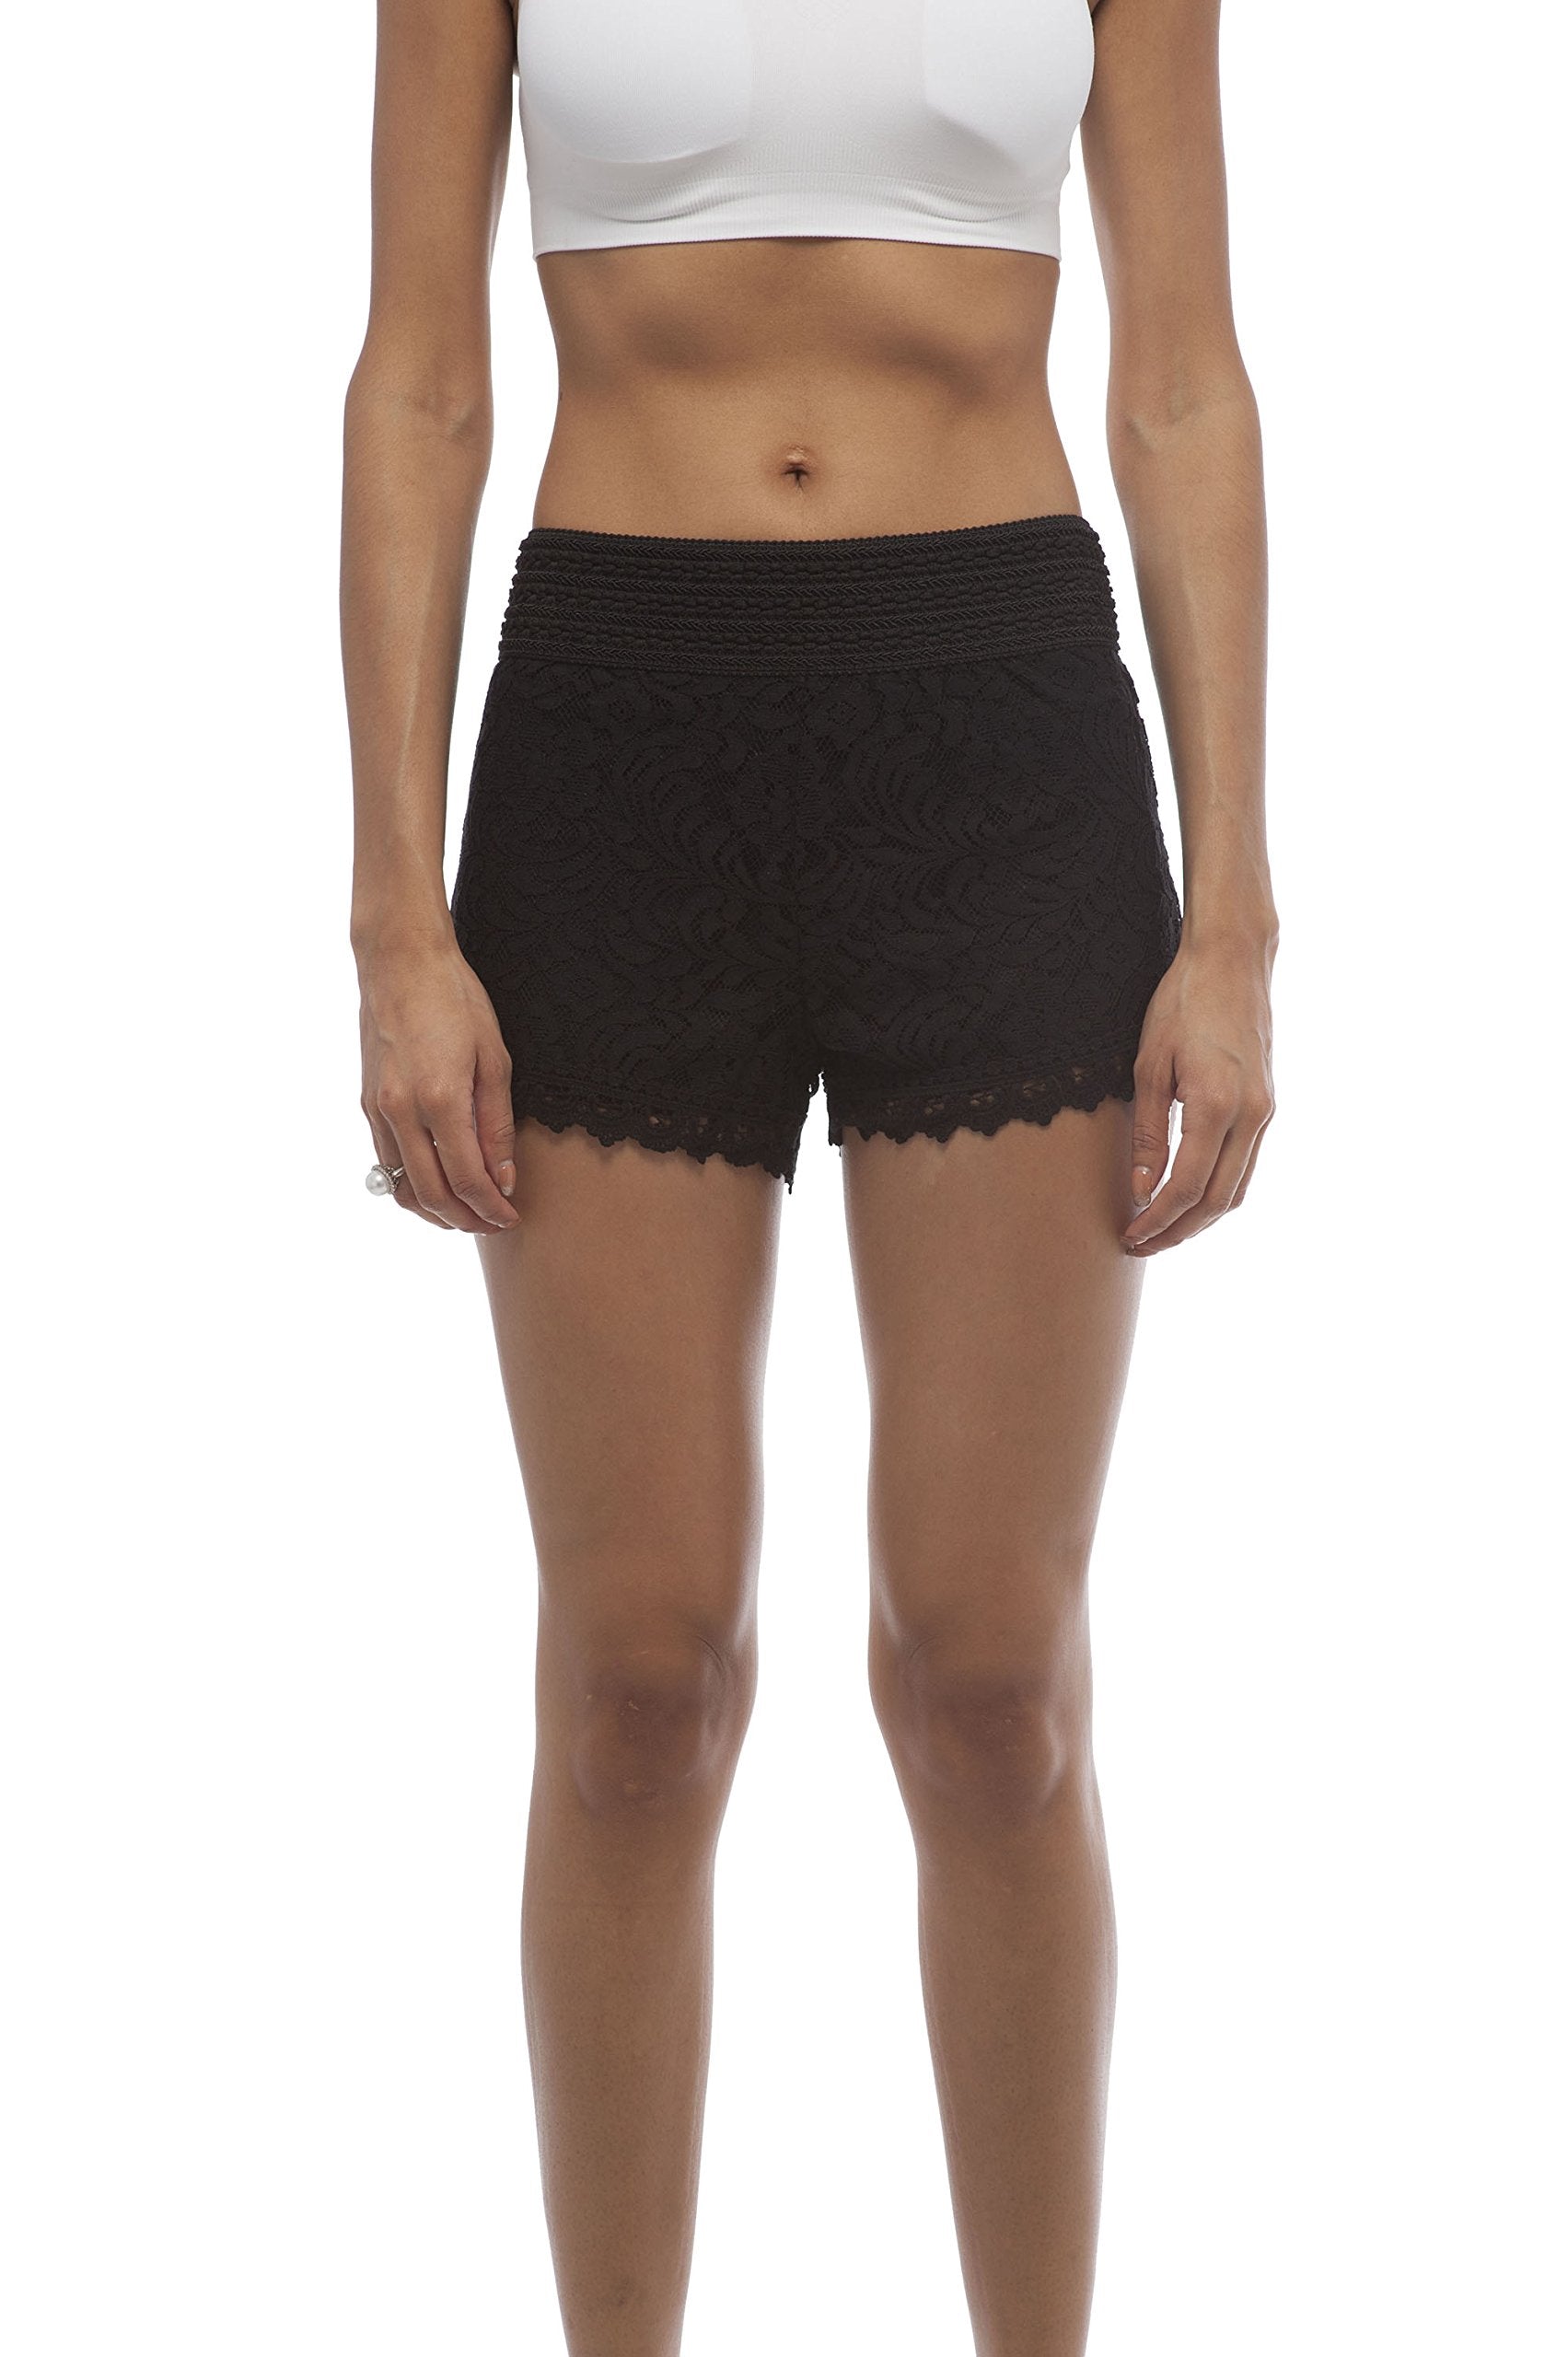 Hollywood Star Fashion Lace Shorts With Lining Contrast And Crochet Trim Elastic Waist